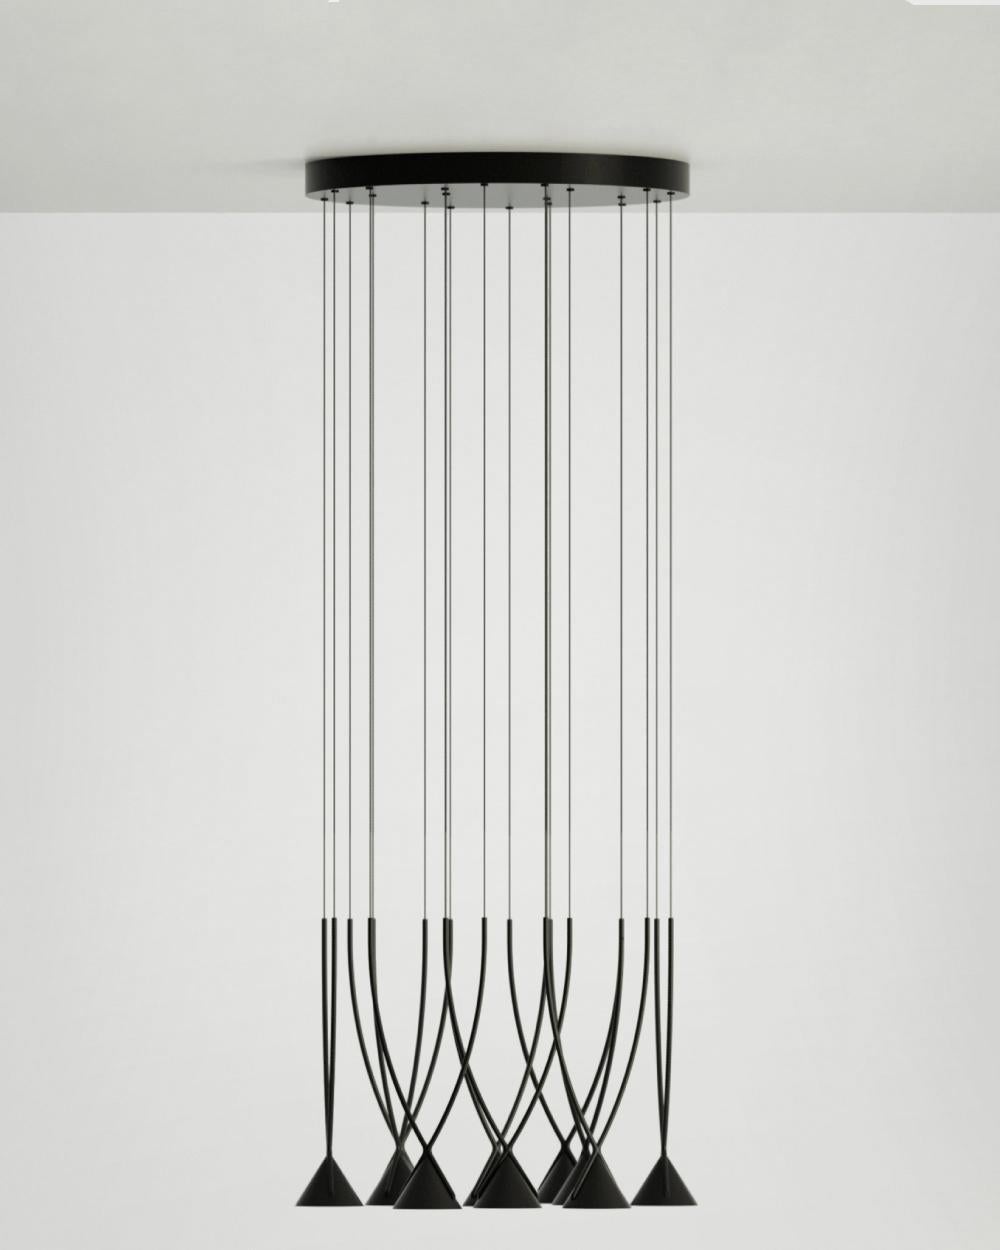 Axolight Jewel Medium 10 Pendant Lamp in Black with Black Finish by Yonoh In New Condition For Sale In Brooklyn, NY